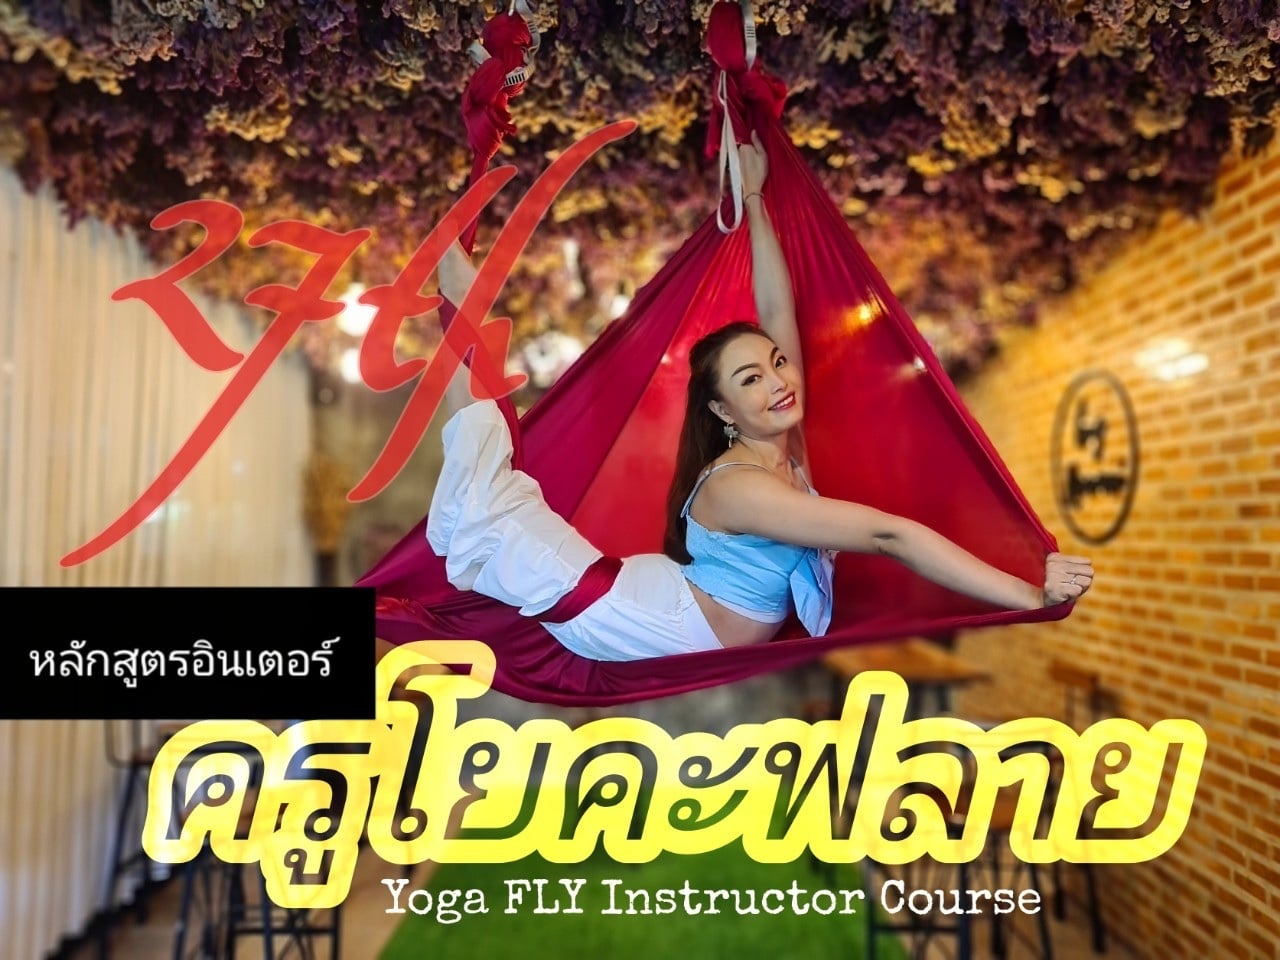 You are currently viewing หลักสูตร คอร์สครู โยคะฟลาย รุ่น 28 Yoga Fly Instructor Course XXVIII